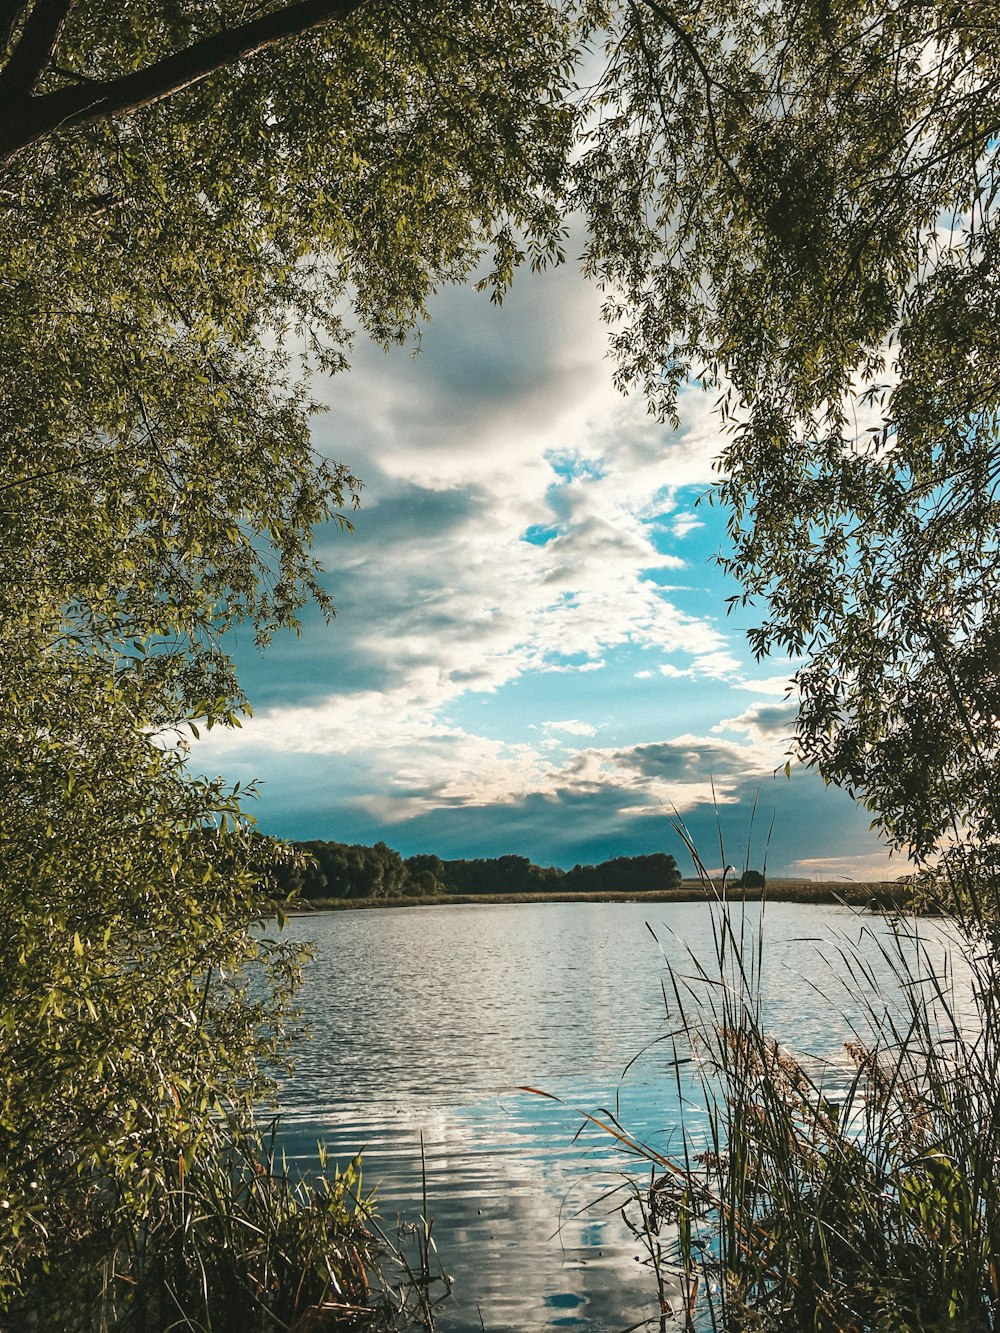 green trees beside body of water under blue and white cloudy sky during daytime